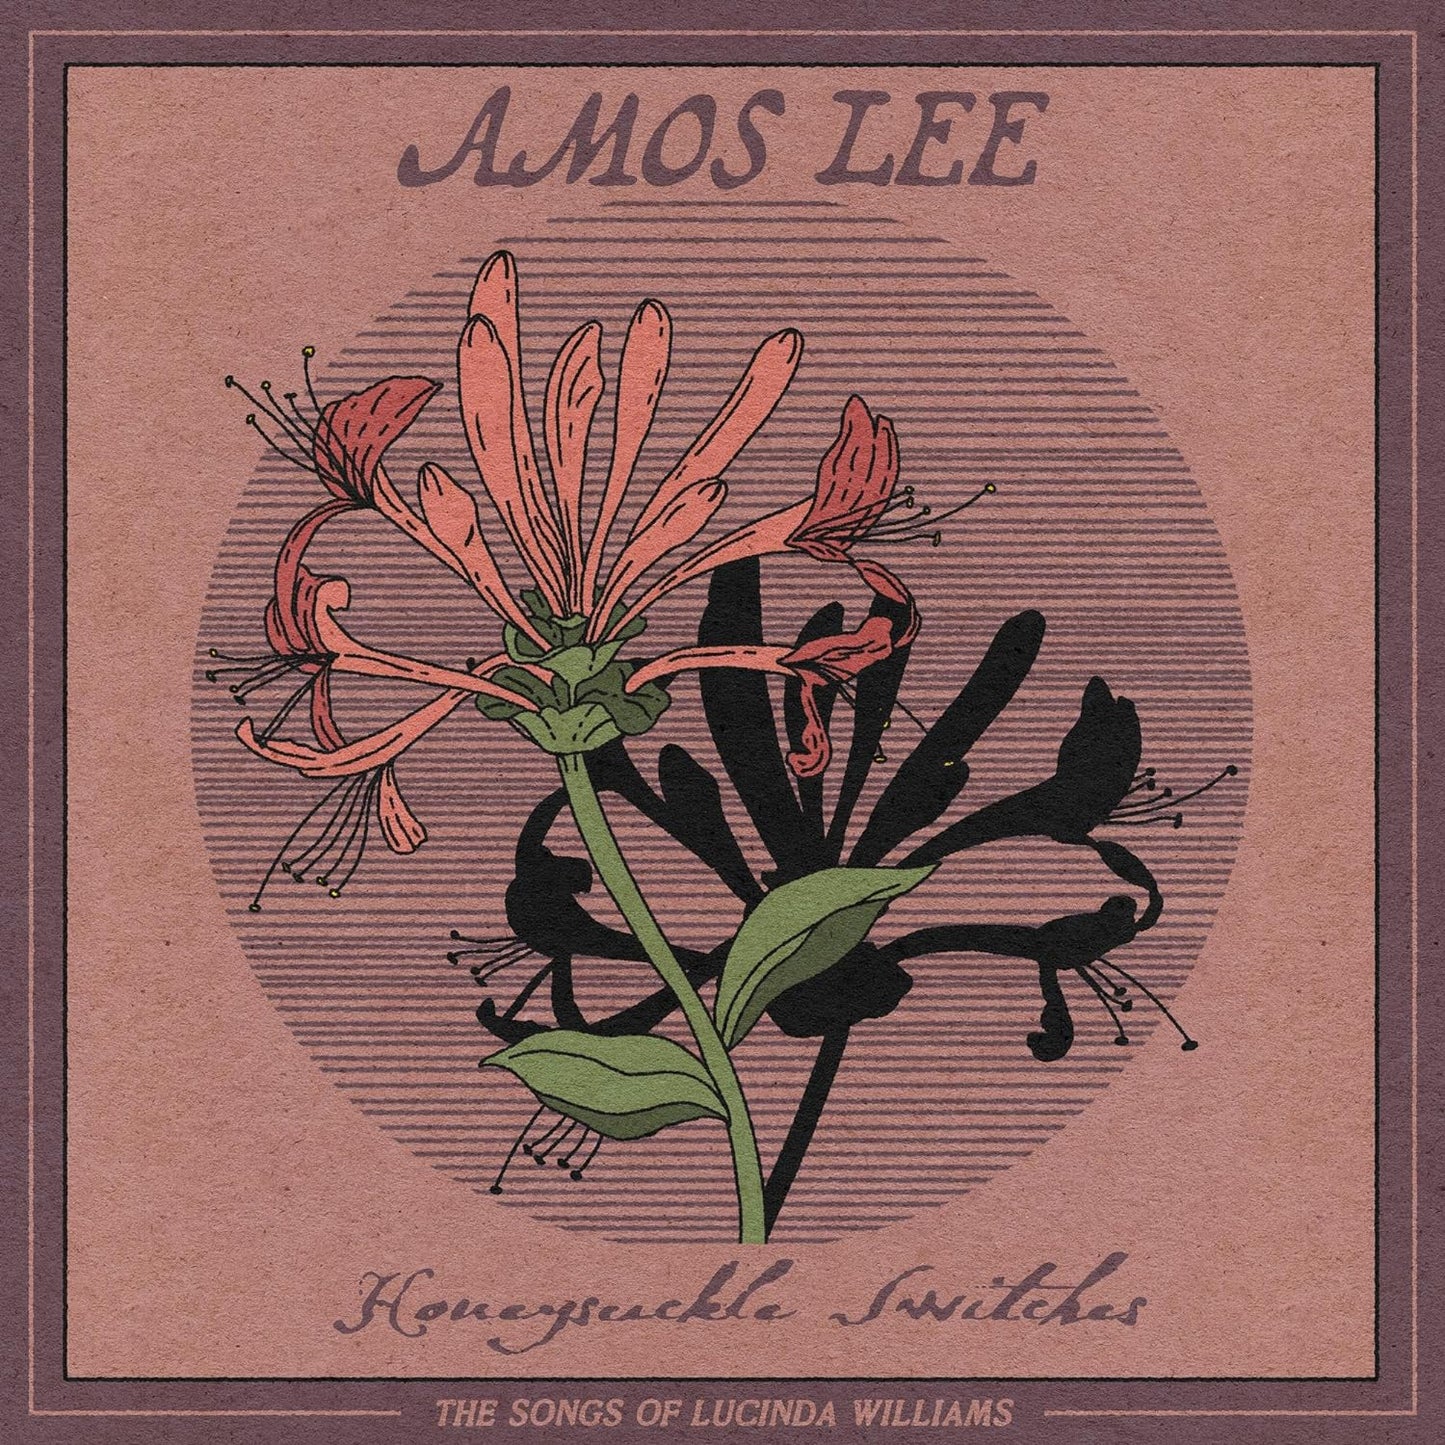 CD - Amos Lee - Honeysuckle Switches: The Songs Of Lucinda Williams